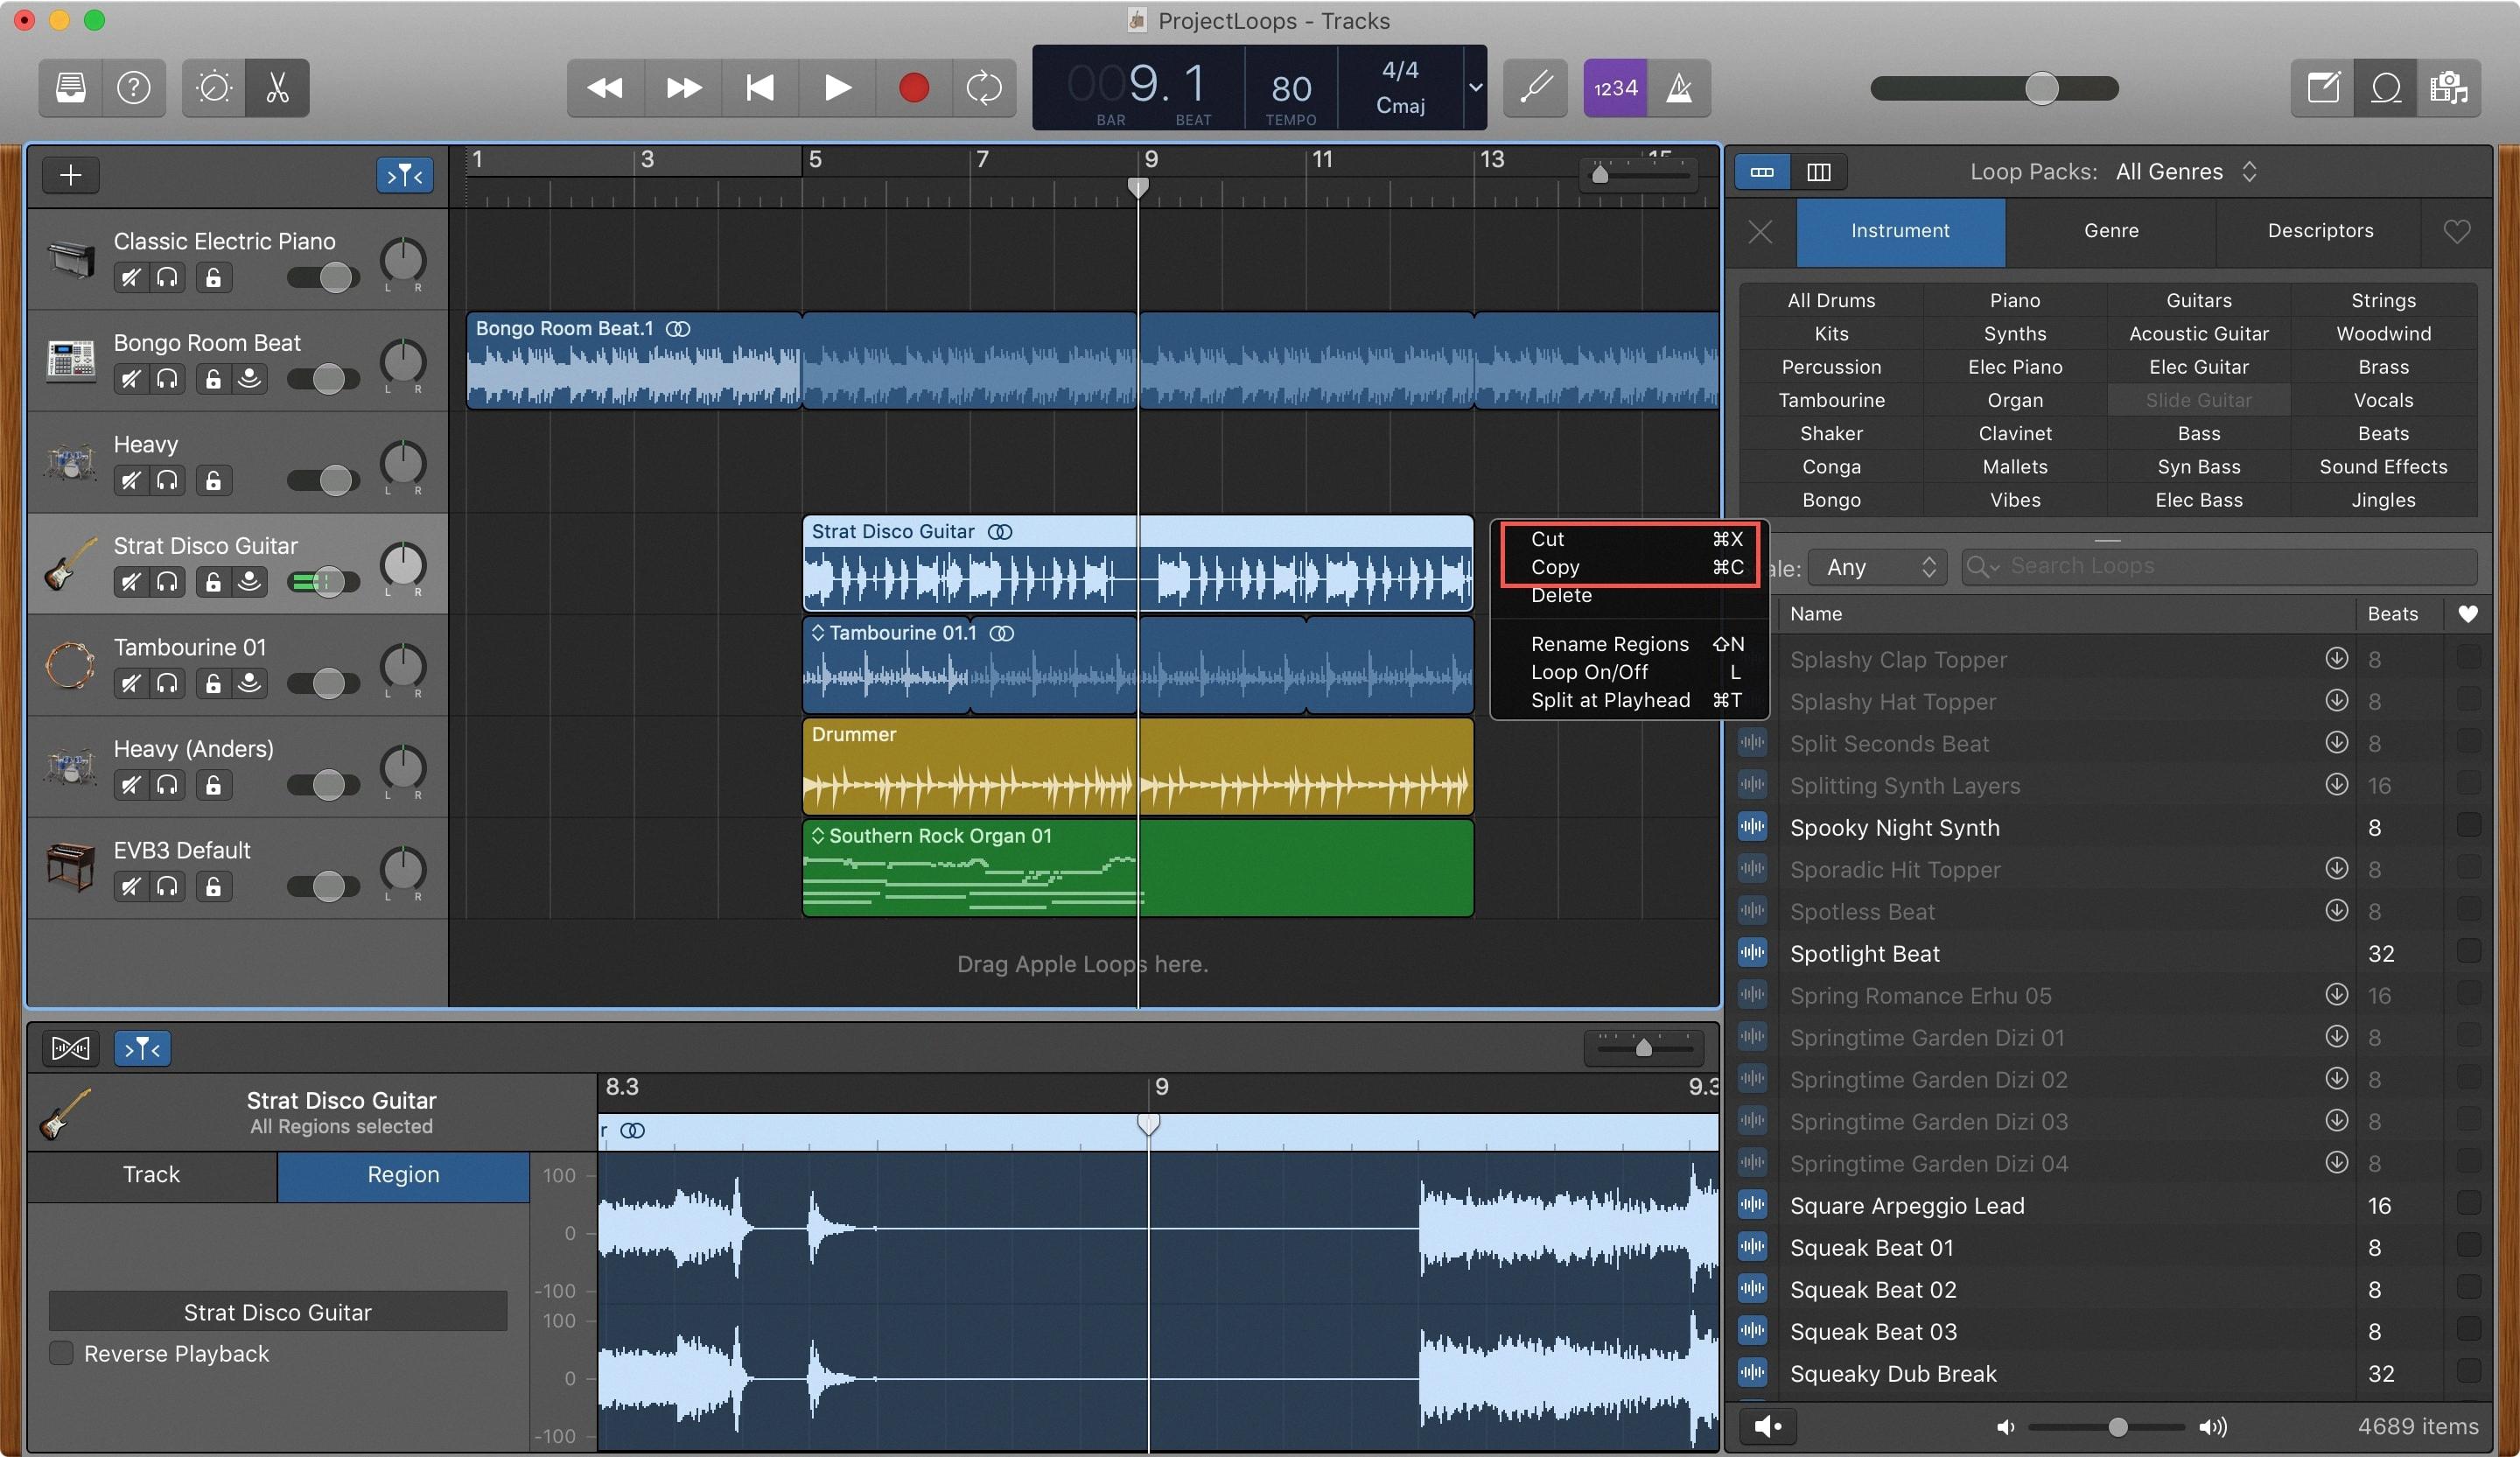 How to Transfer Files with GarageBand 11